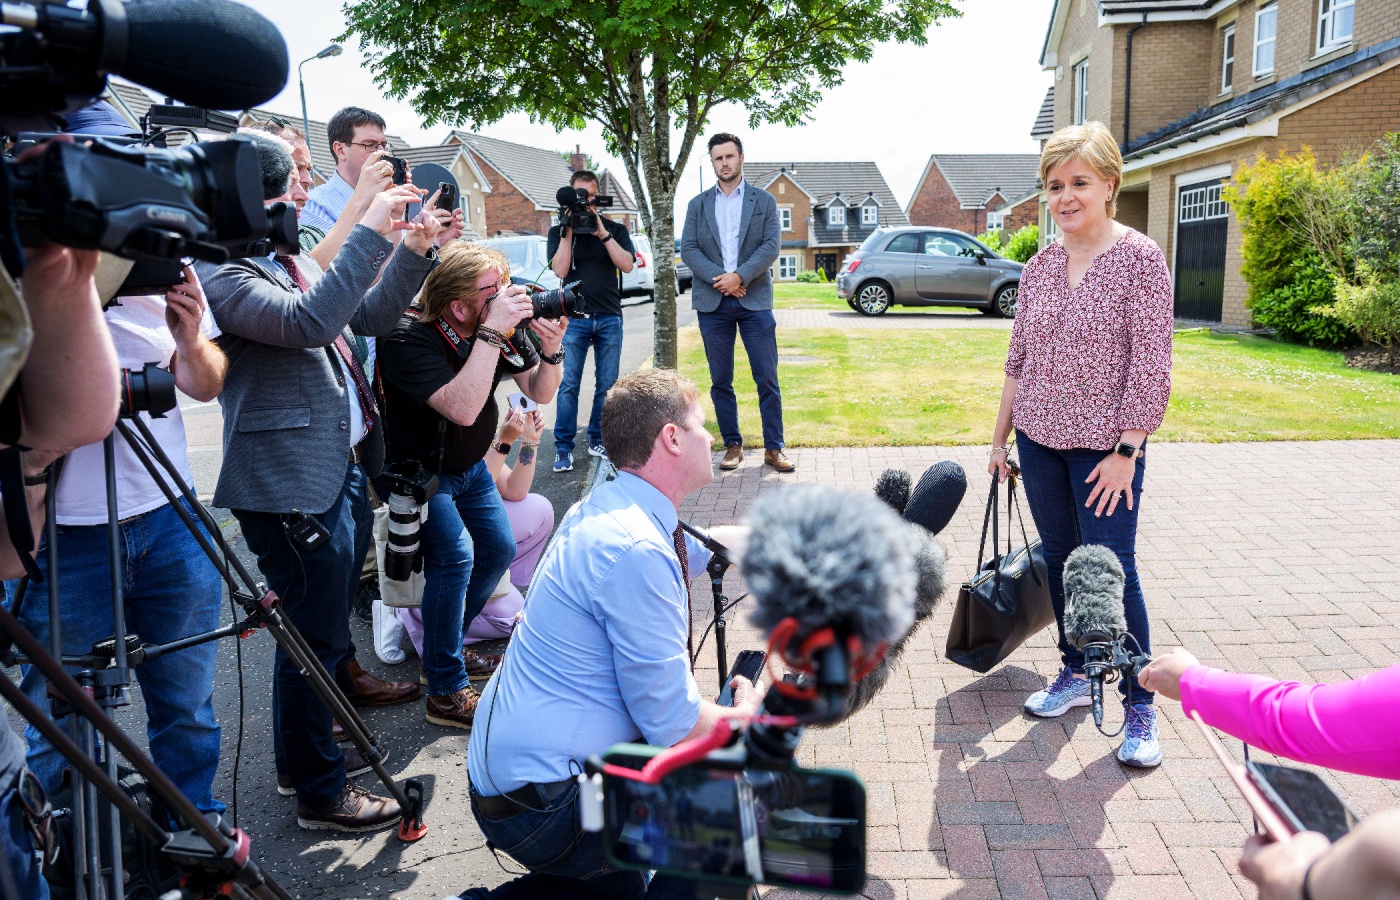 The arrest of Nicola Sturgeon and the search of her home sparked a large media presence outside her home in Uddingston.